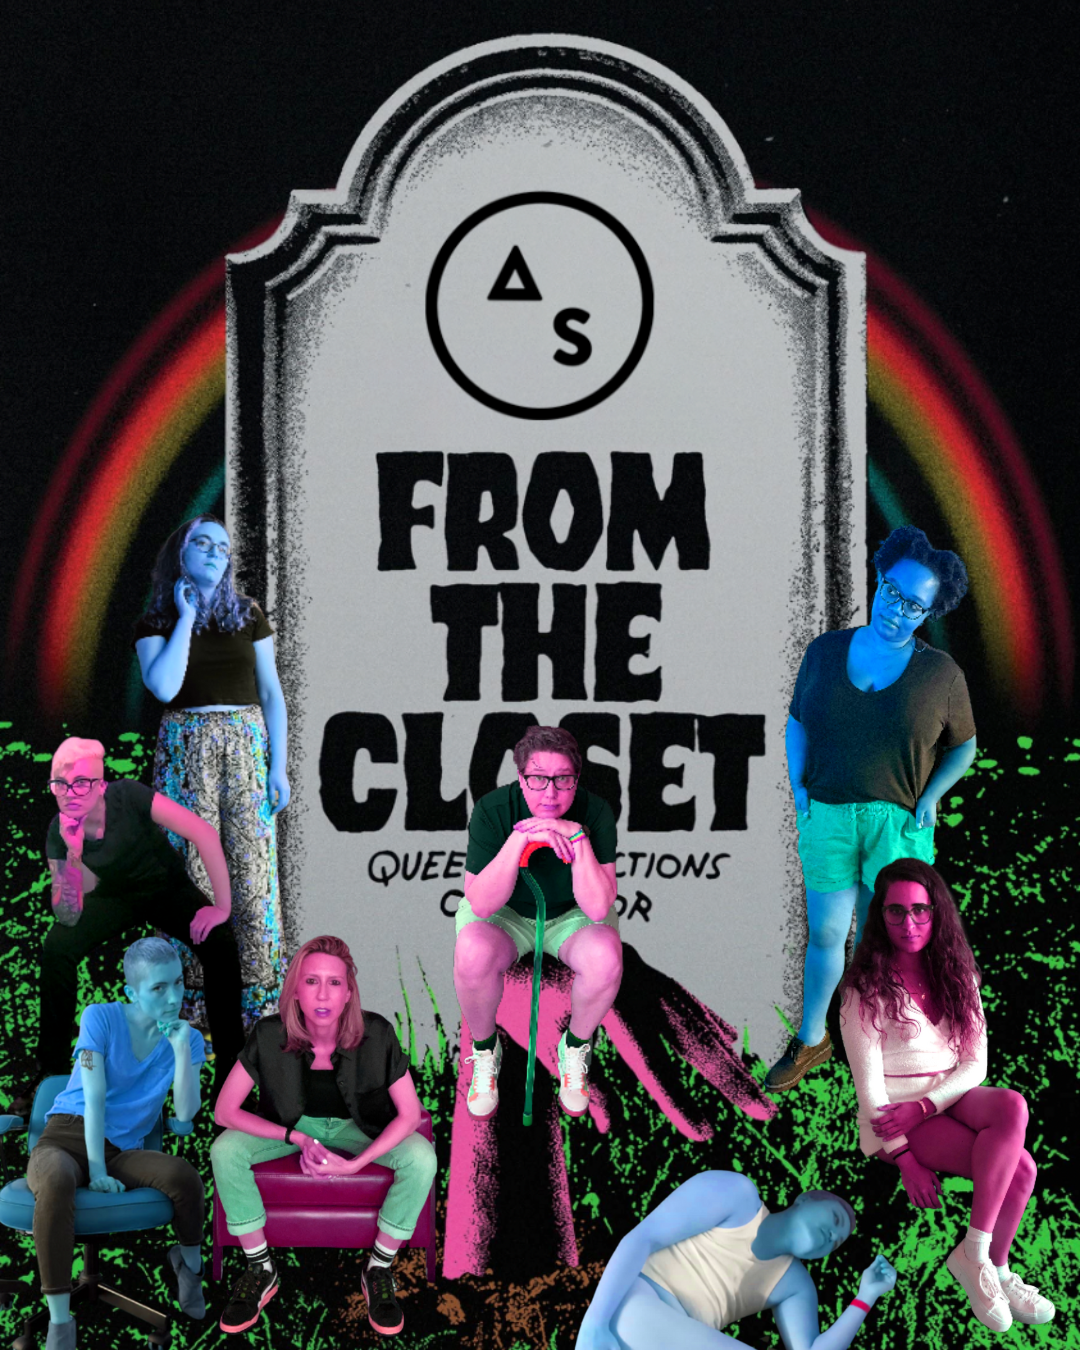 the autostraddle team has been collaged on the It Came From the Closet cover. There is a tombstone, with a rainbow behind it, and a hand doing the "gay" flop coming out of the ground. Anya, Carmen Laneia and Viv are in shades of blue and green, while Kayla, heather, Riese, and Nico are in shades of pink, green, and white. The overall effect is eerie and spooky.